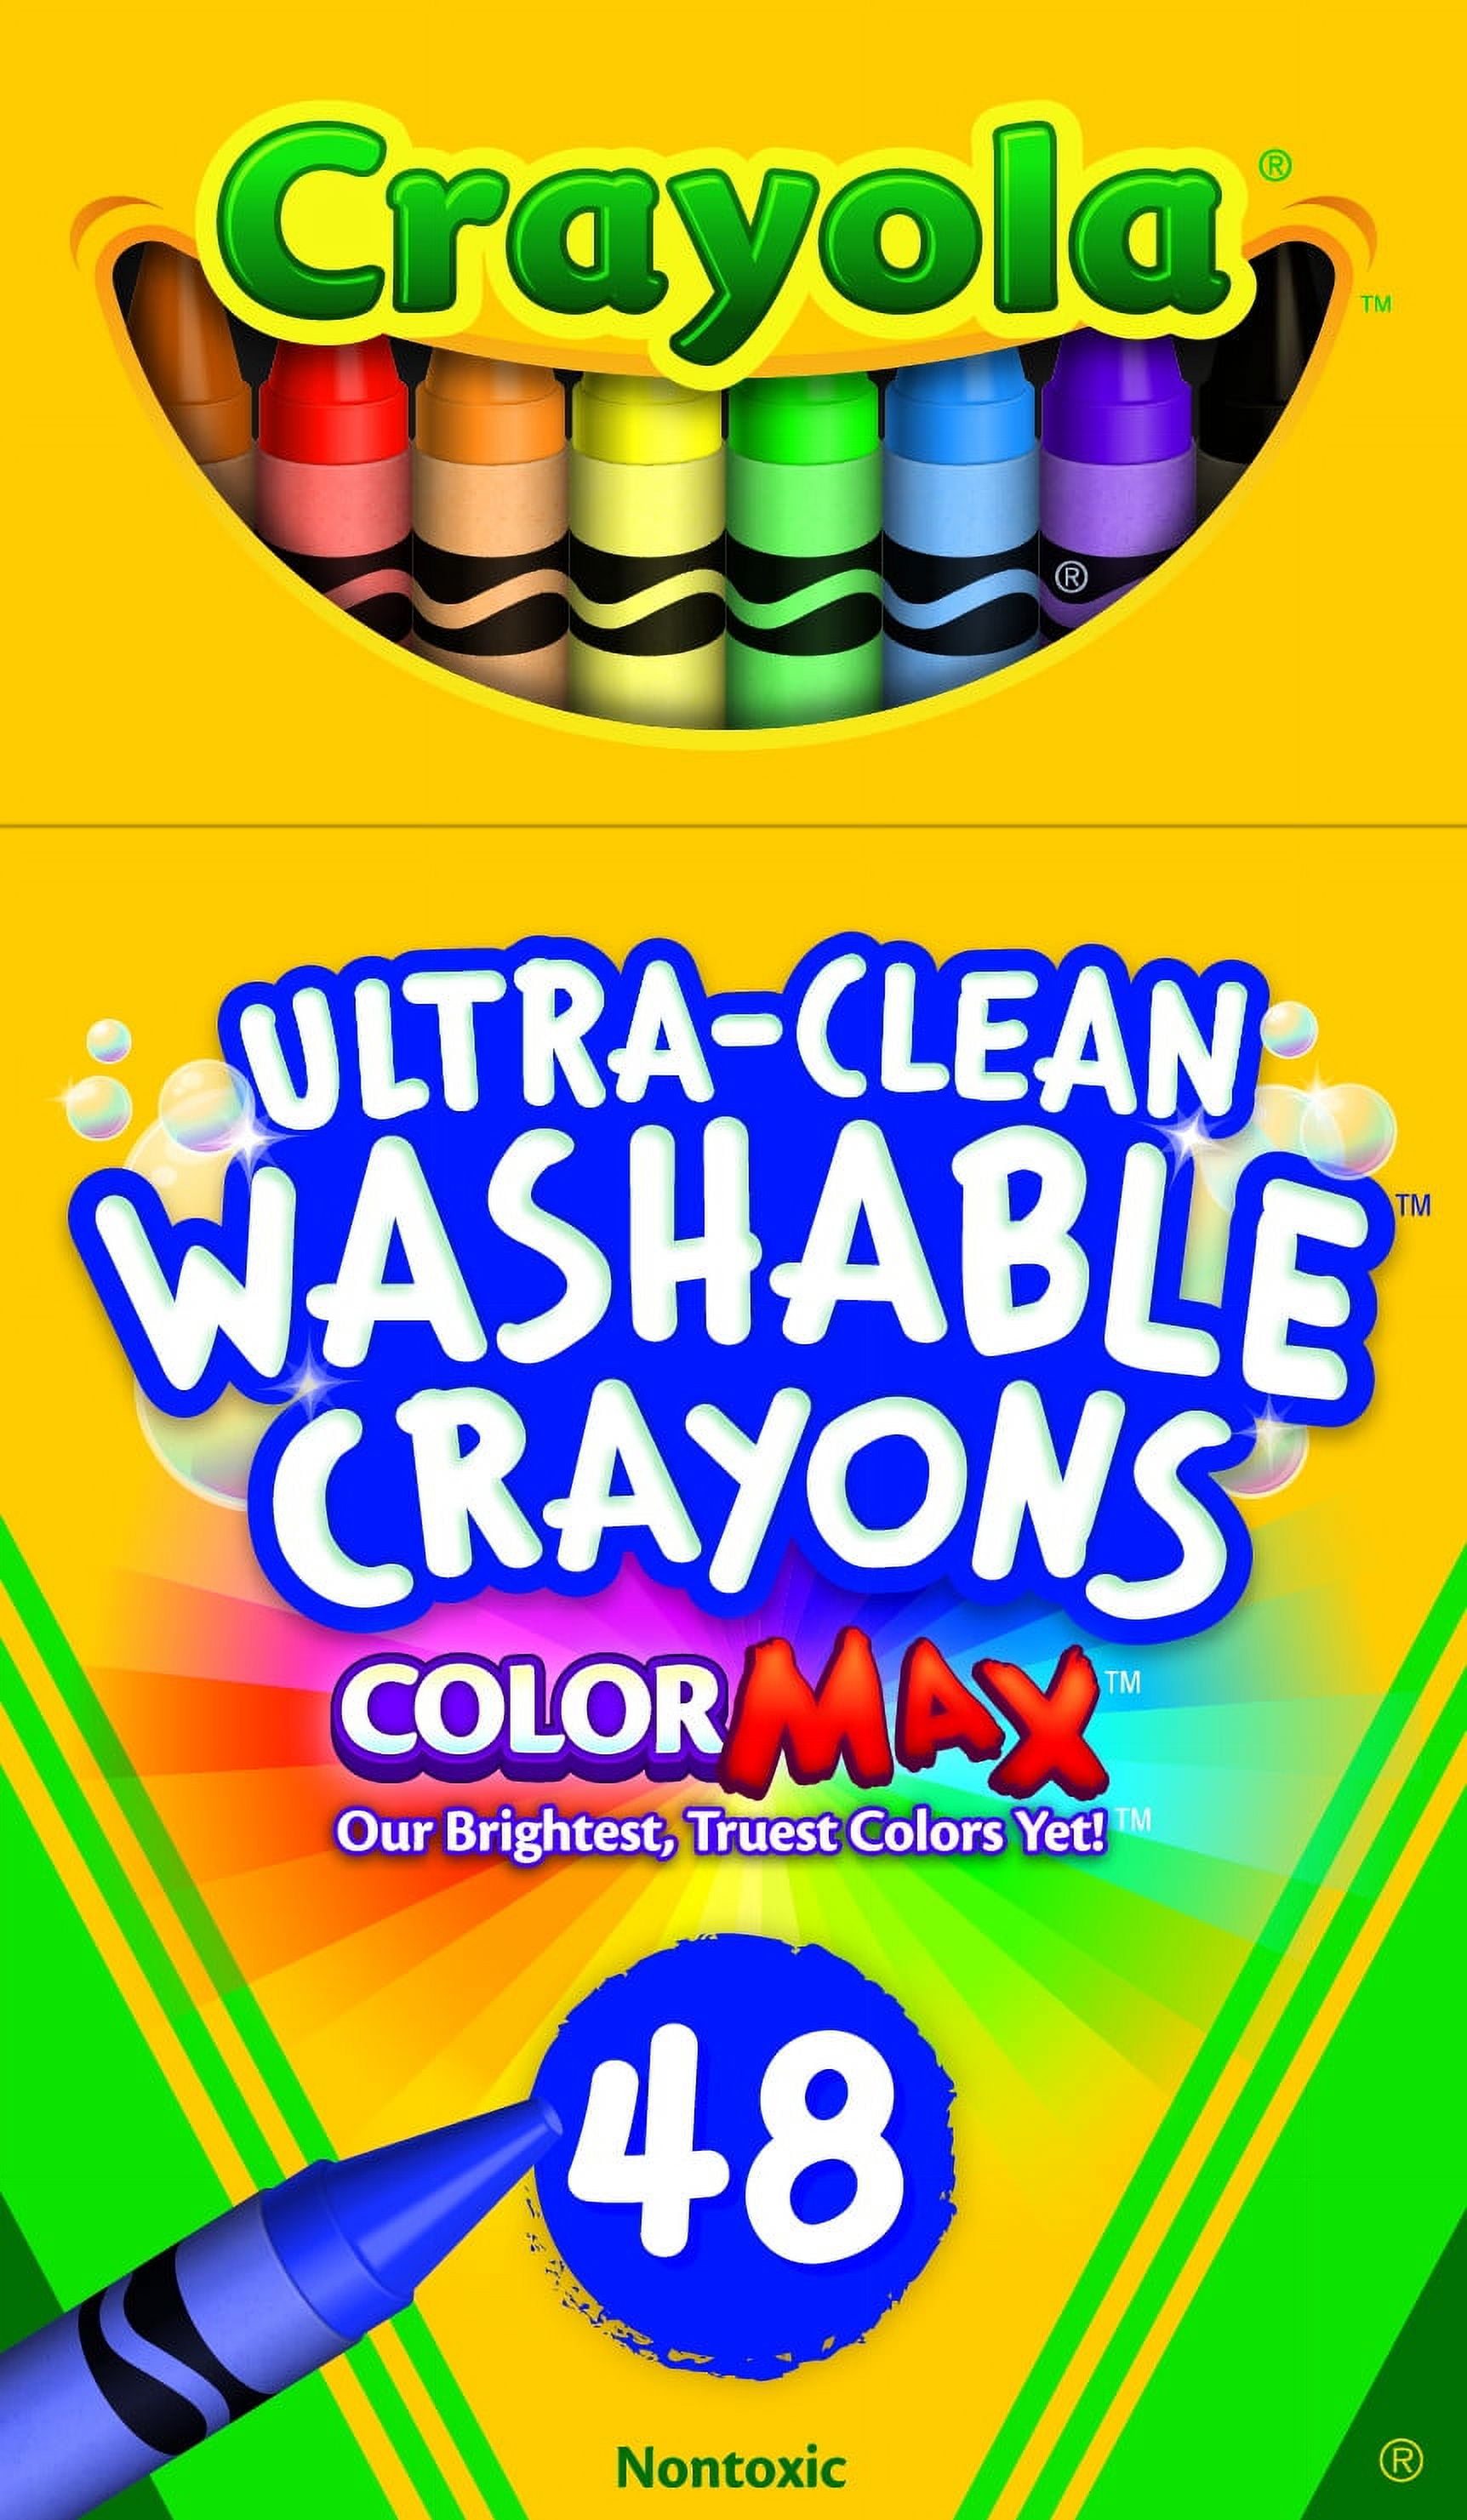 Crayola Ultra Clean Washable Color Max Crayons, Standard Size, Set of 24